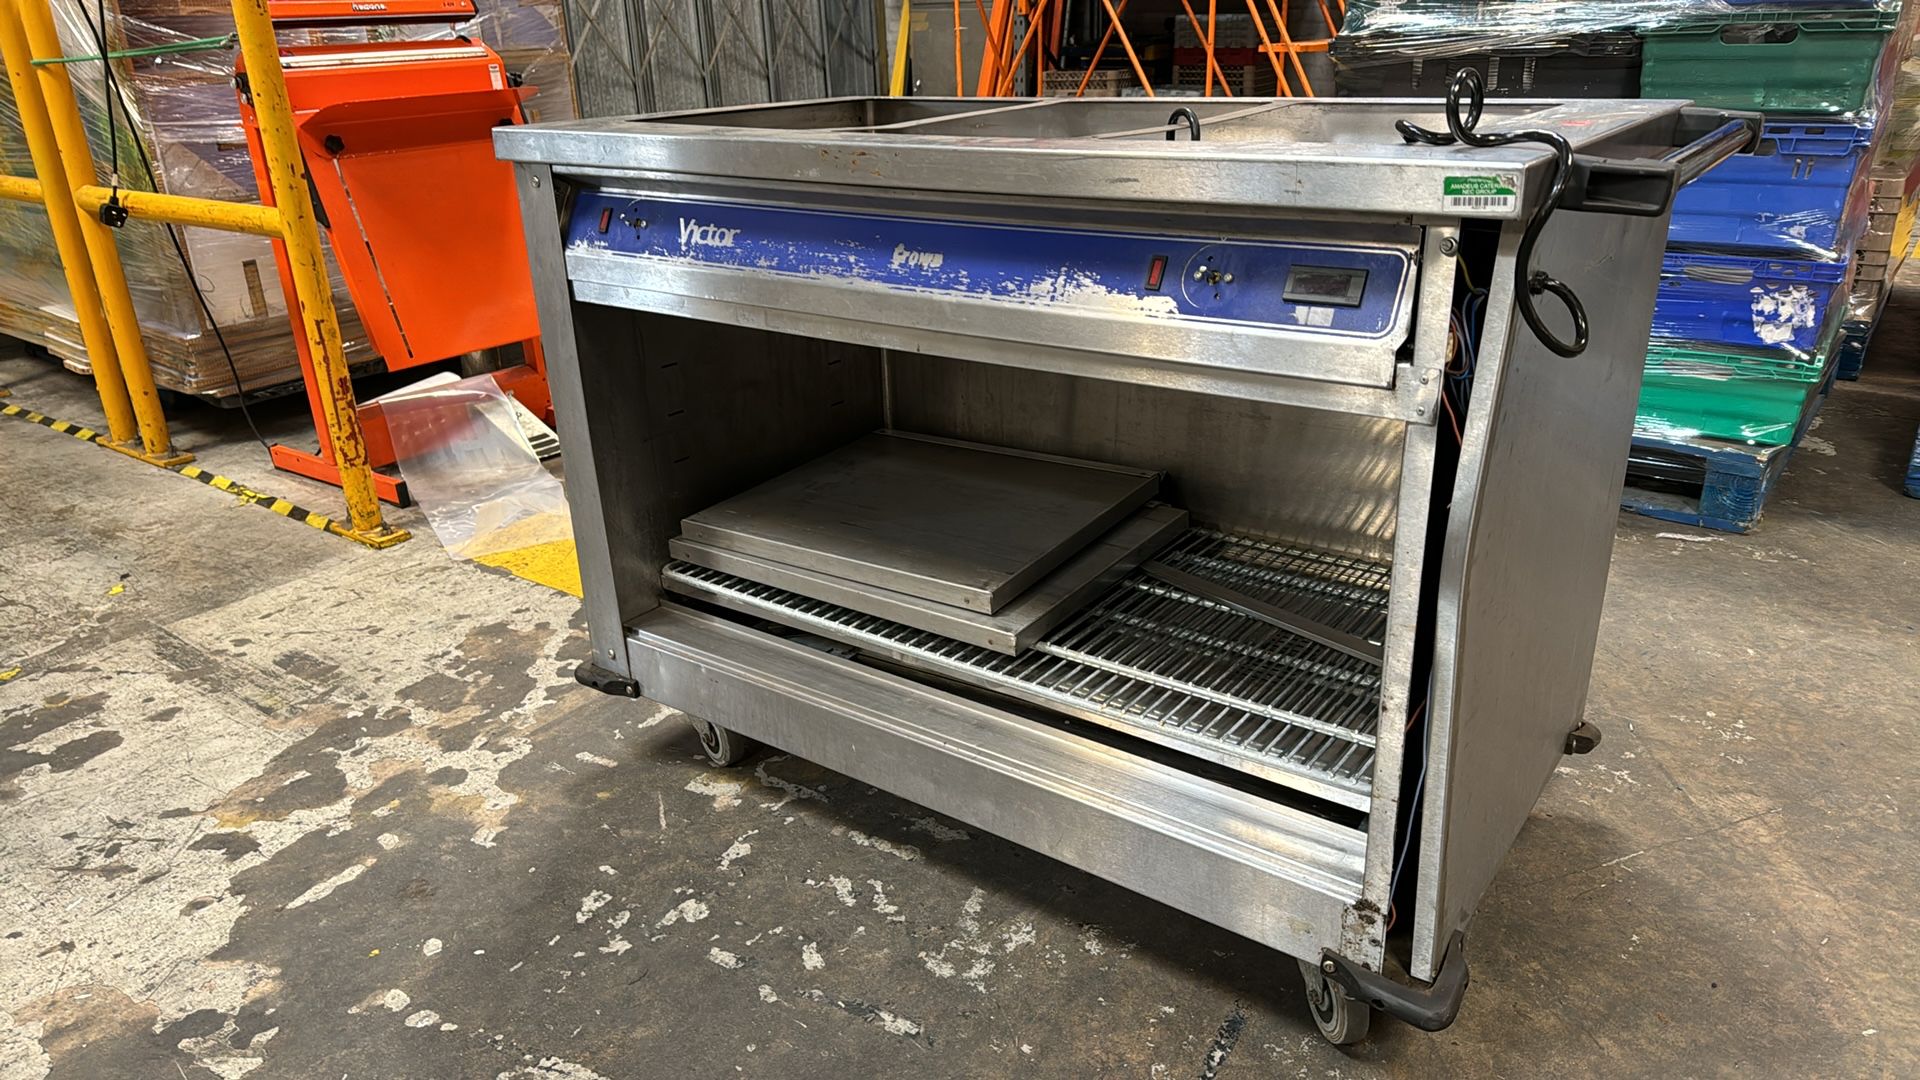 VICTOR Heater / Bain-Marie - Image 2 of 7